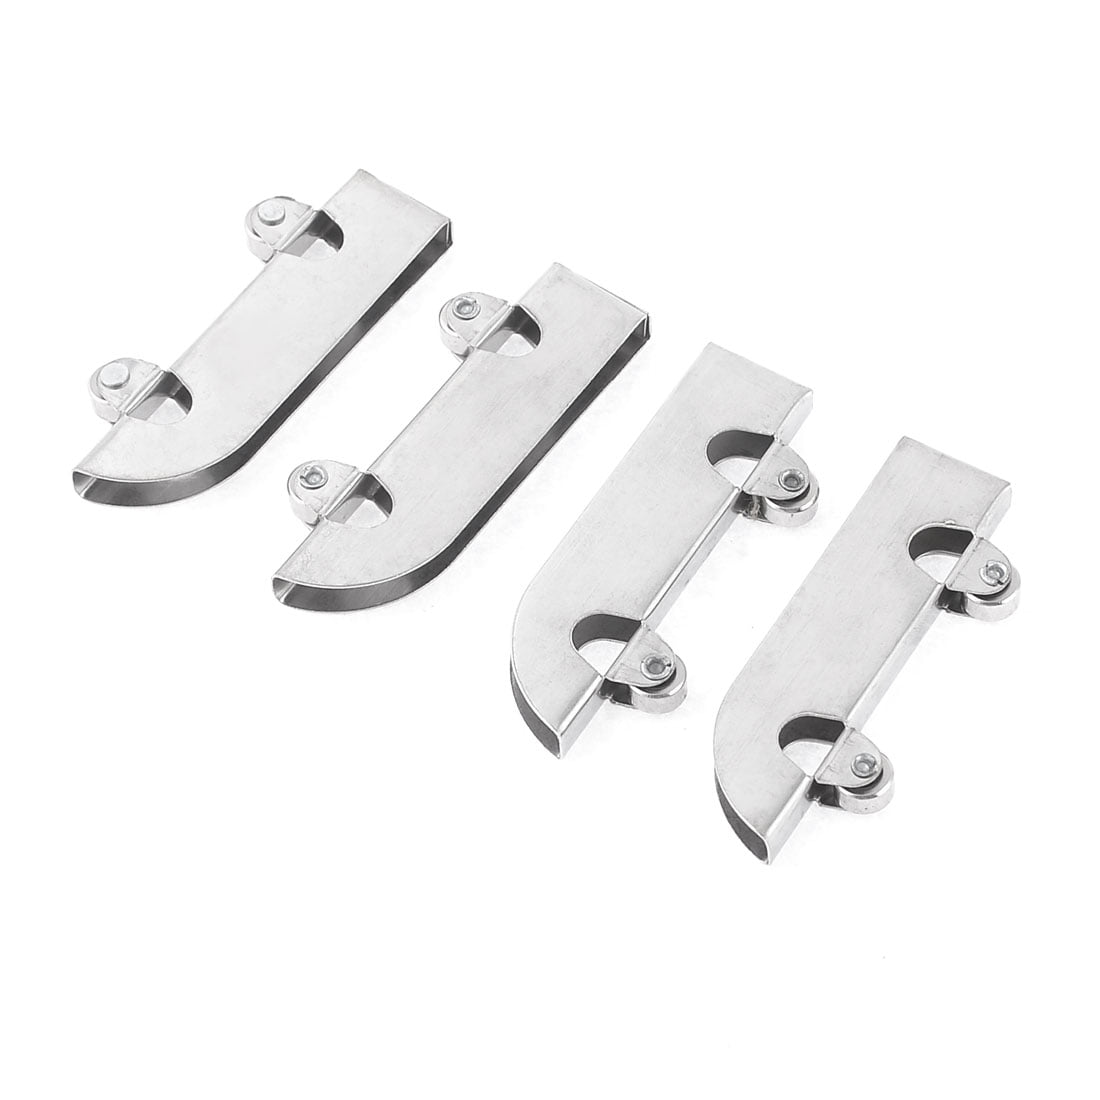 uxcell Double wheels Metal Sliding Door Roller Pulley Silver Tone 4pcs for 6mm Glass